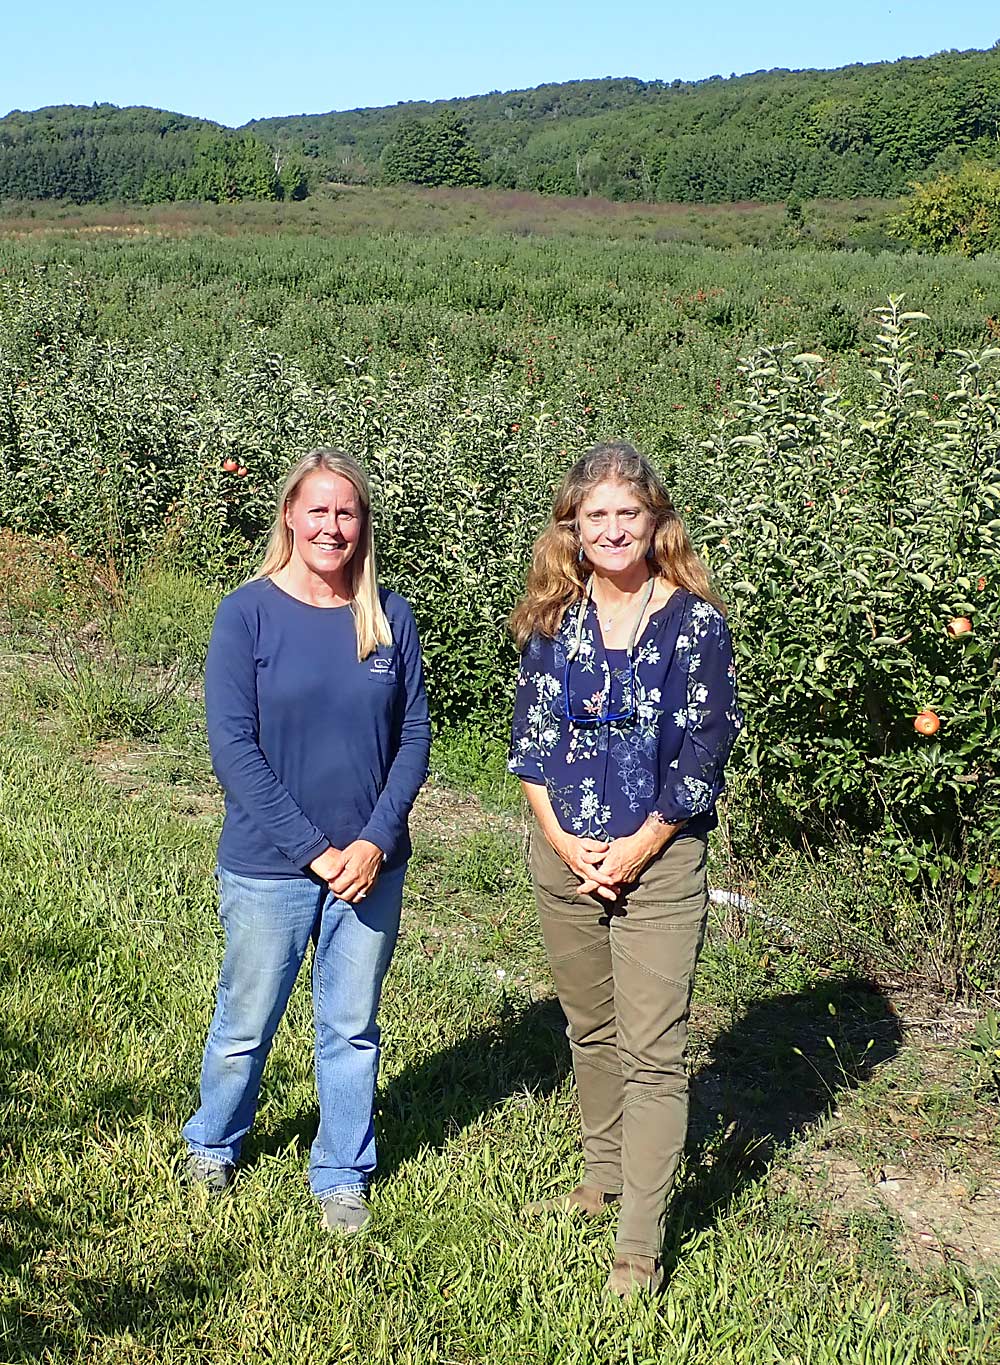 Kim Hayes, left, farmland and easement programs director for the Leelanau Conservancy, joins Michelle Kitts at the edge of the 217-acre Hohnke Farm in Cedar, Michigan, that Kitts and her husband, Greg, purchased last June. “From the hill, you can see the dunes, Manitou Island, Lake Michigan. It’s beautiful,” Michelle said. Land with views like that sells quickly and at a high price on the real estate market, but conservation easements such as the one on this farm typically moderate the price, which makes it more affordable for other farmers to purchase. Greg actually leased and farmed this land for a few years prior to purchasing it. (Leslie Mertz/for Good Fruit Grower)